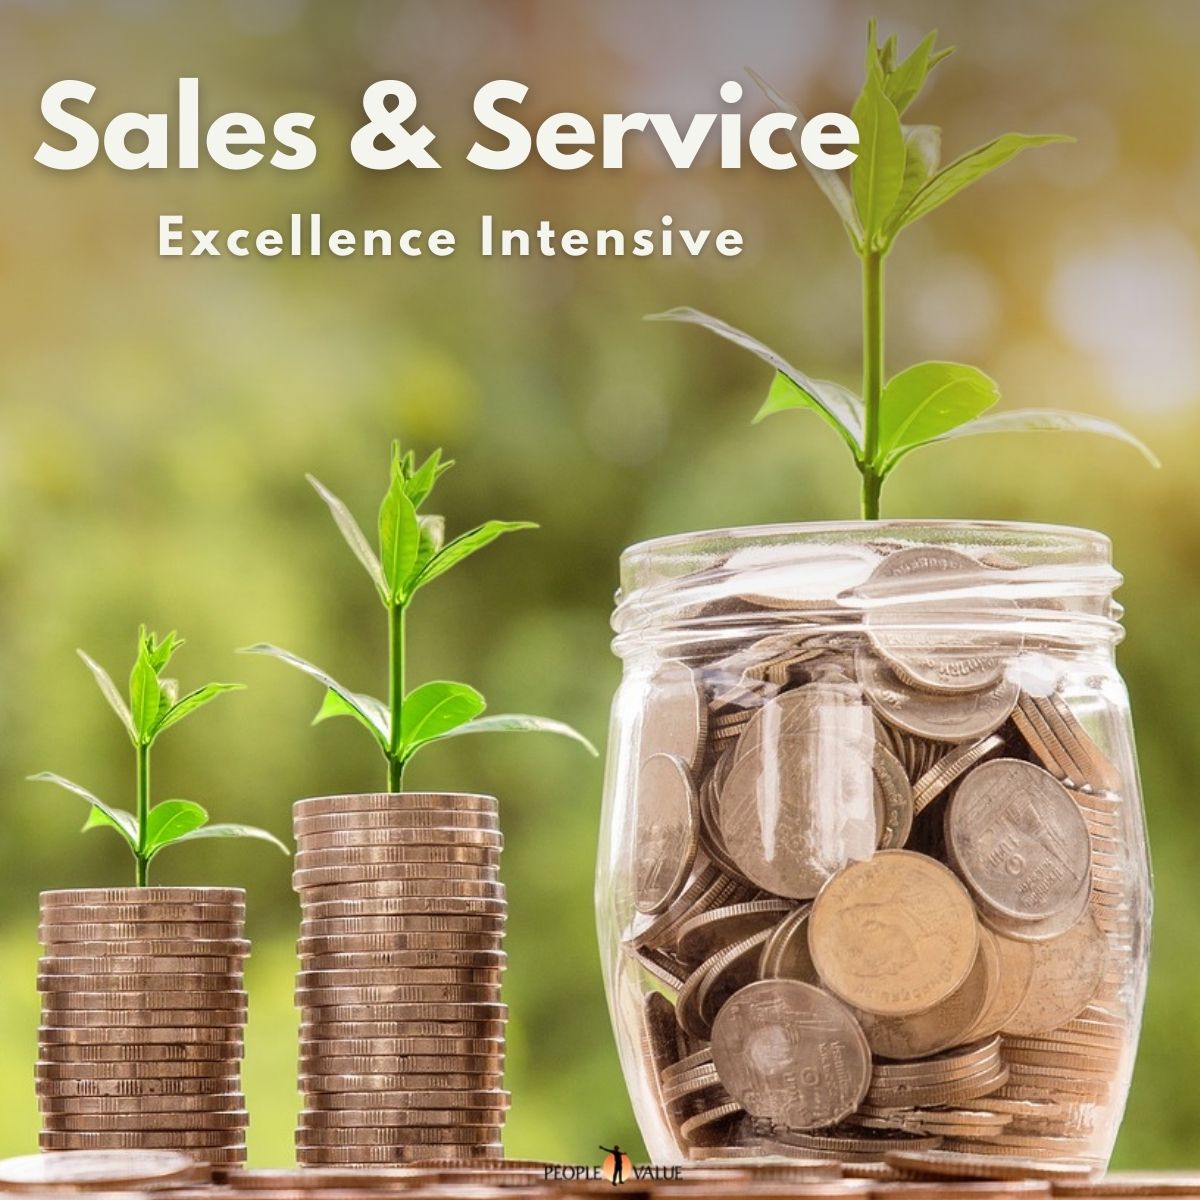 Sales & Service Excellence Intensive